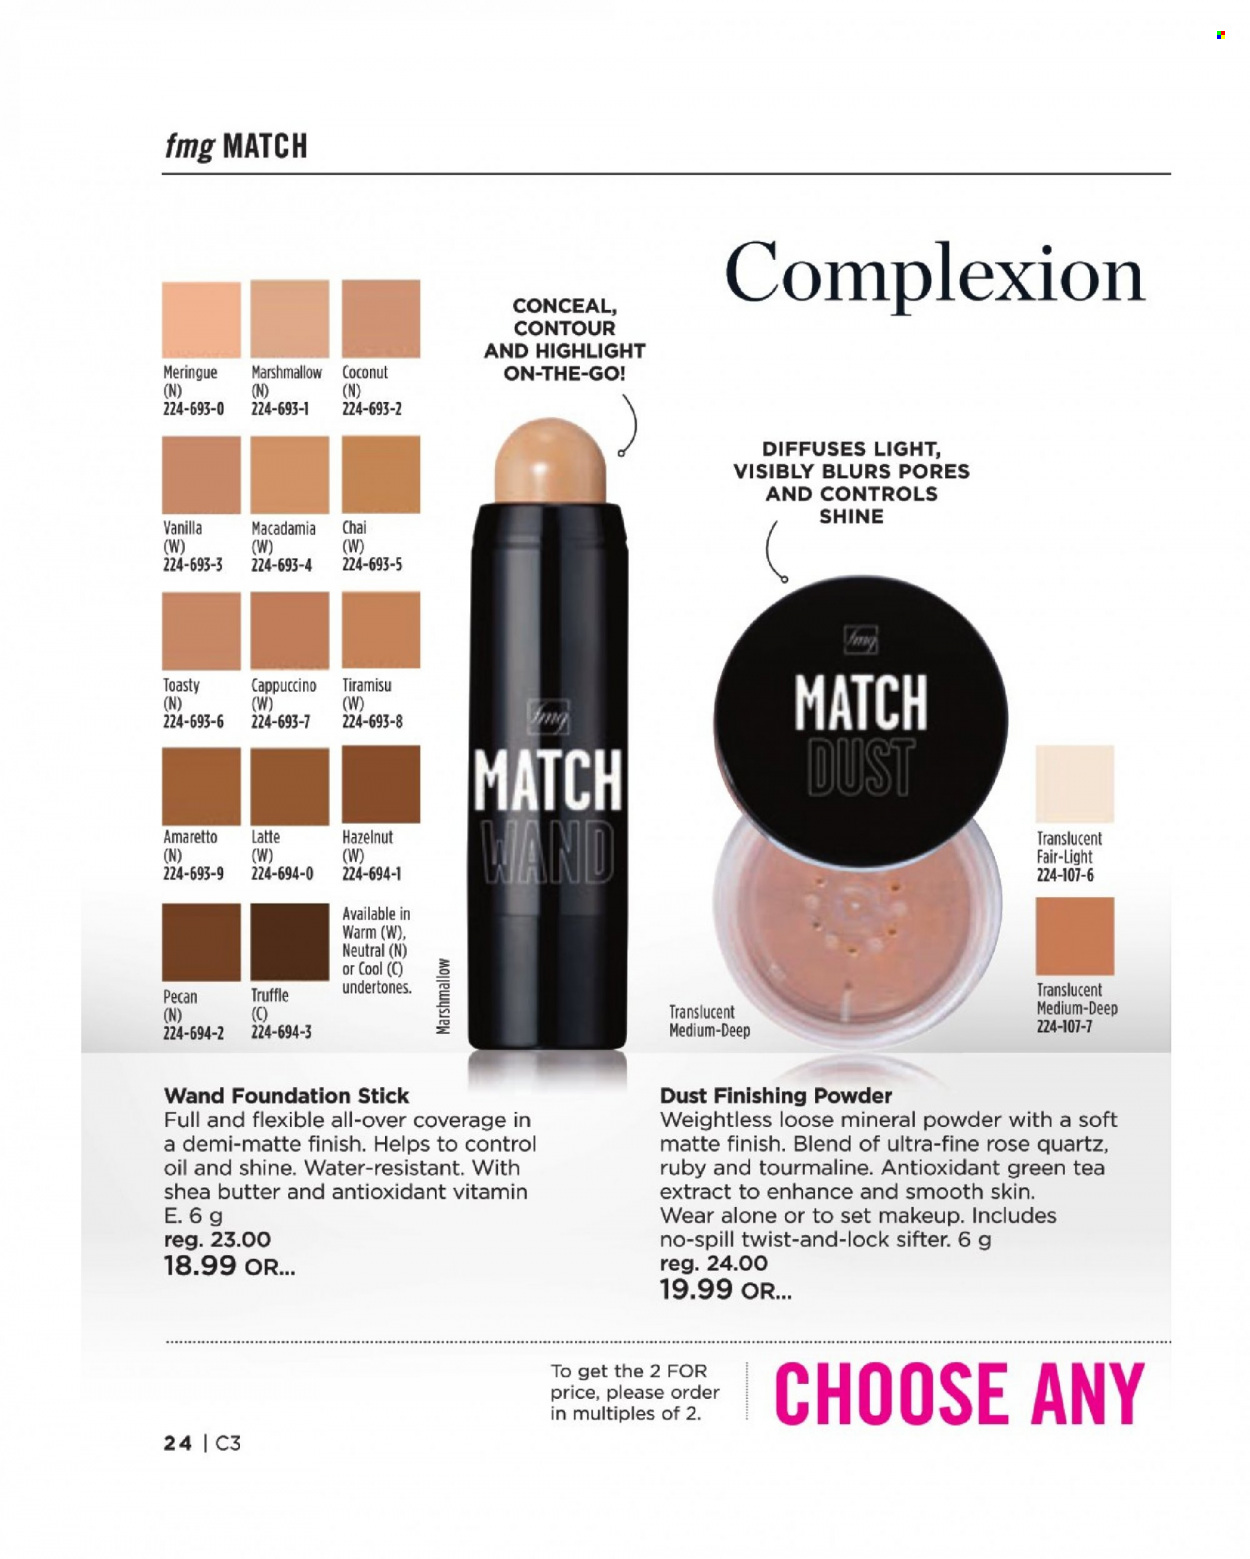 thumbnail - Avon Flyer - Sales products - makeup, contour, face powder, mineral powder, finishing powder, Go!. Page 24.